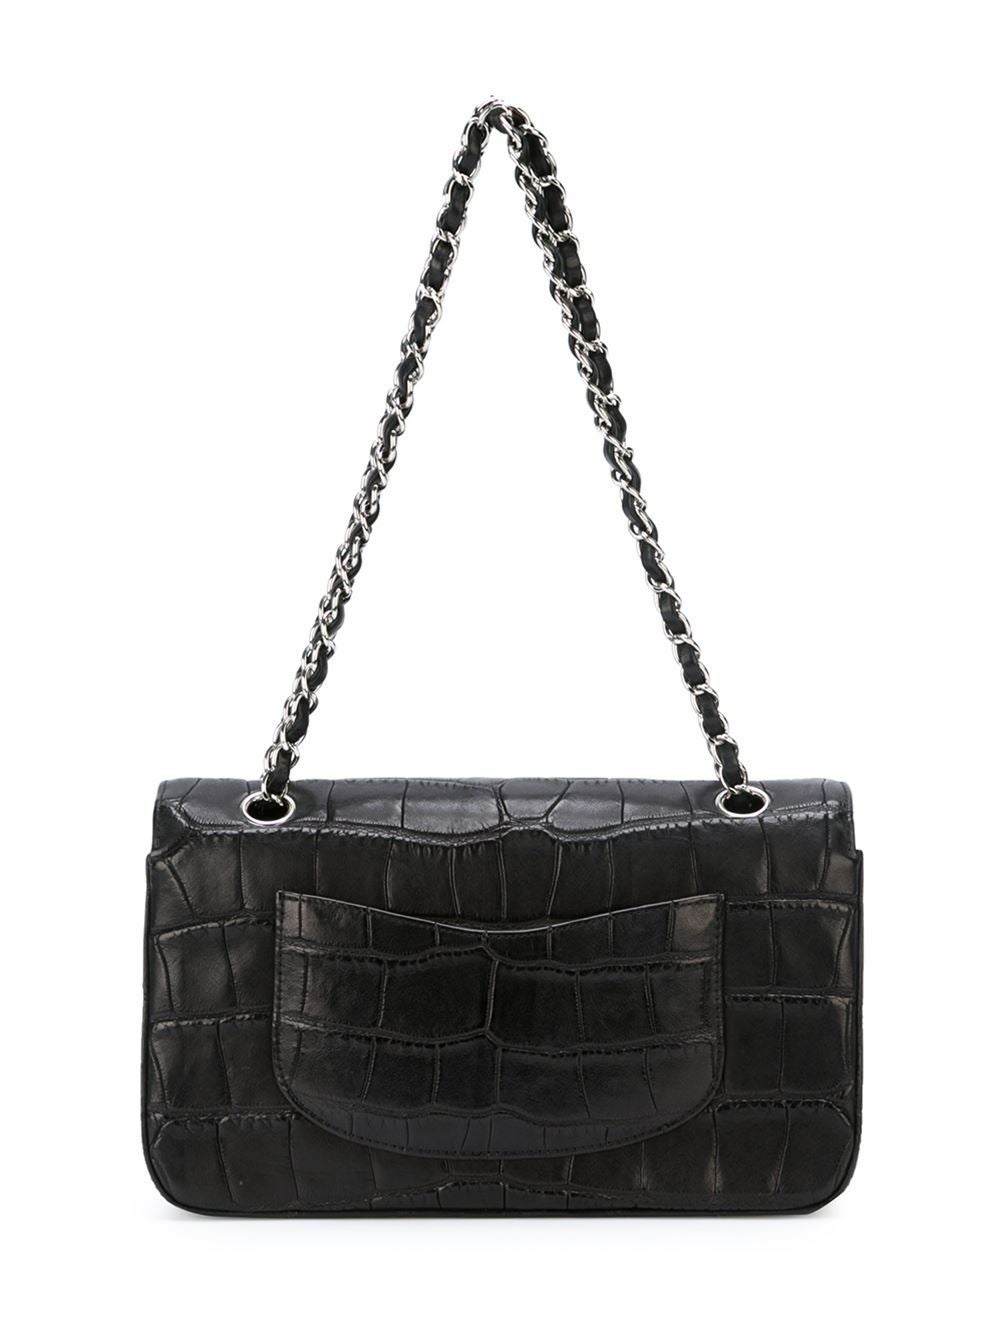 This black crocodile leather flap shoulder bag from Chanel features a top with twist-lock closure, a silver-tone logo plaque, a chain and leather strap, a back slip pocket, an internal logo plaque, an internal zipped pocket, an internal flap closure